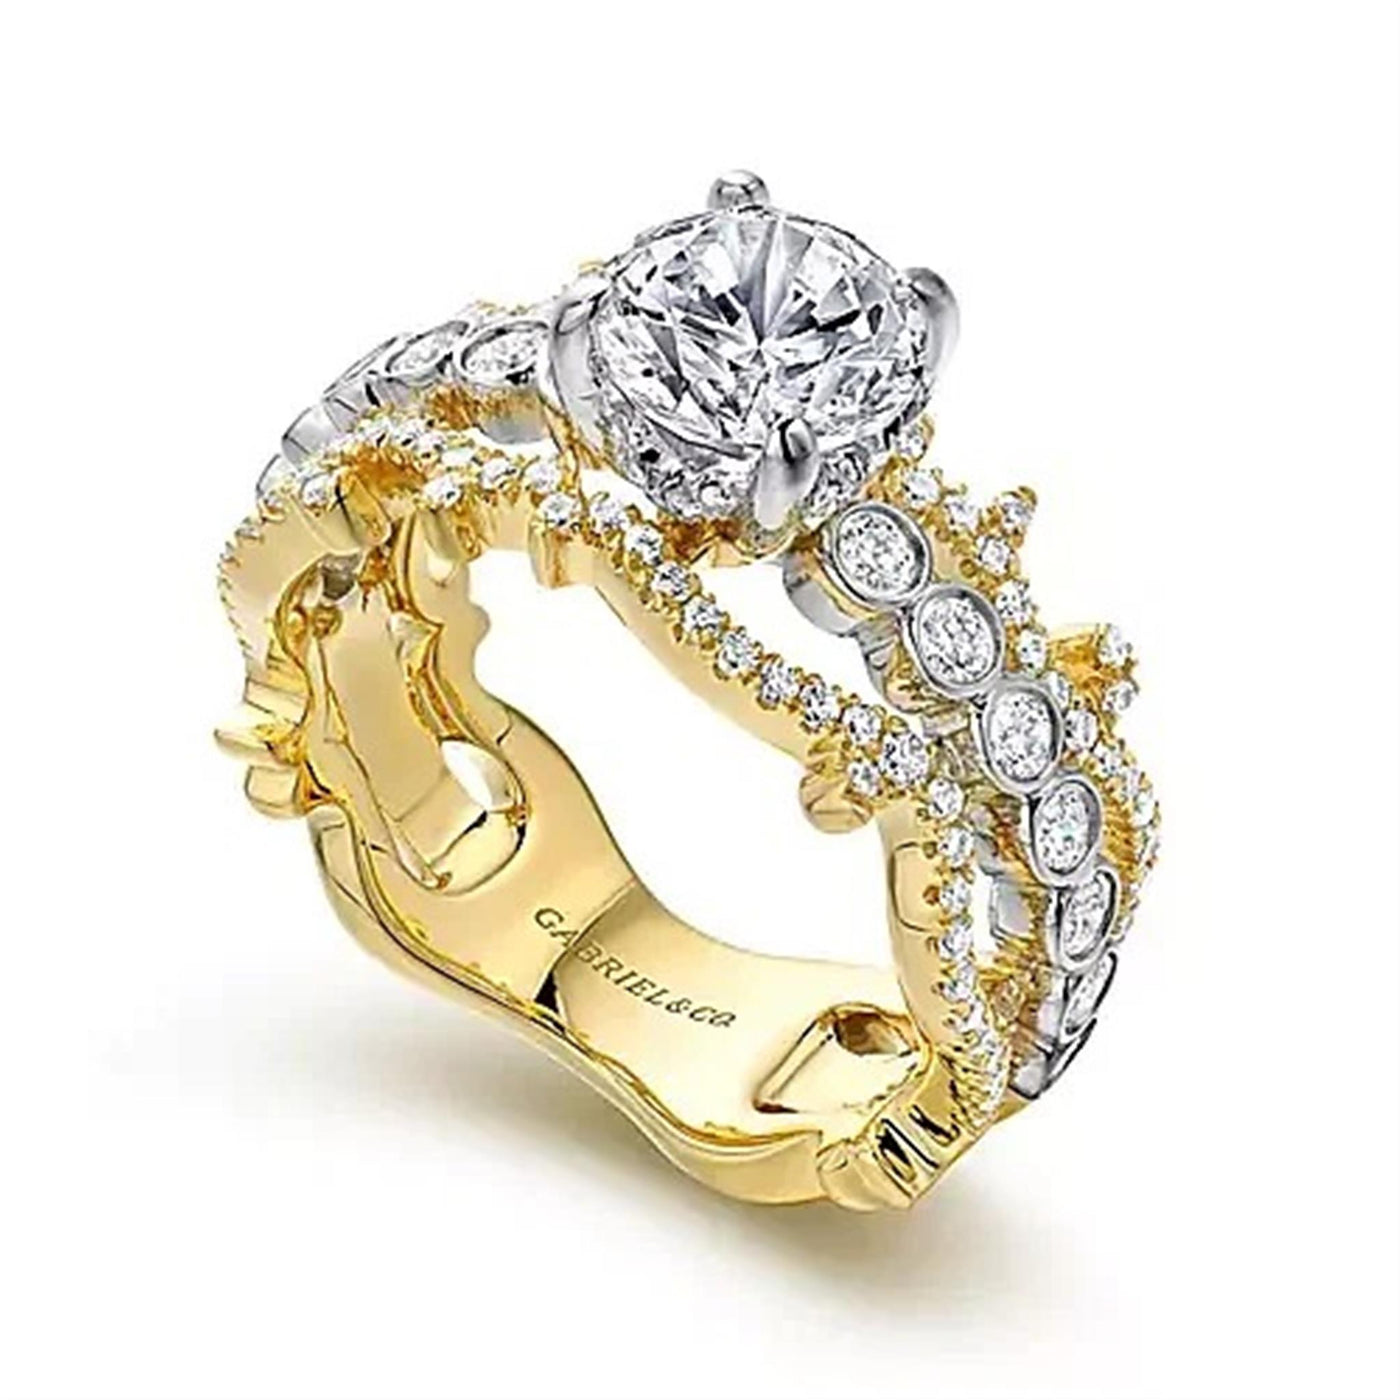 Gabriel - Contemporary Collection 14K White & Yellow Gold .69ctw 4 Prong Style Diamond Semi-Mount Engagement Ring